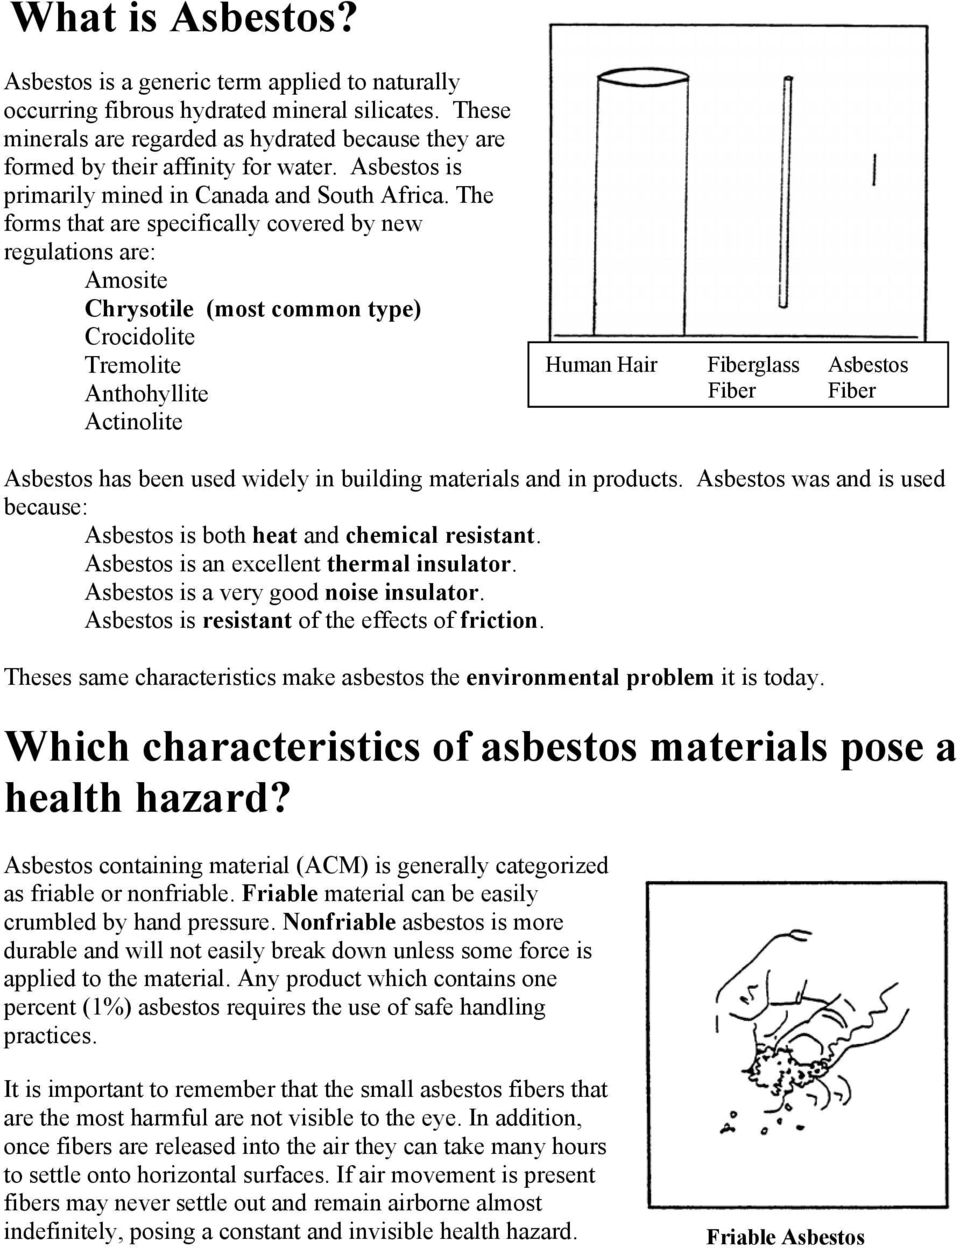 The forms that are specifically covered by new regulations are: Amosite Chrysotile (most common type) Crocidolite Tremolite Anthohyllite Actinolite Human Hair Fiberglass Asbestos Fiber Fiber Asbestos